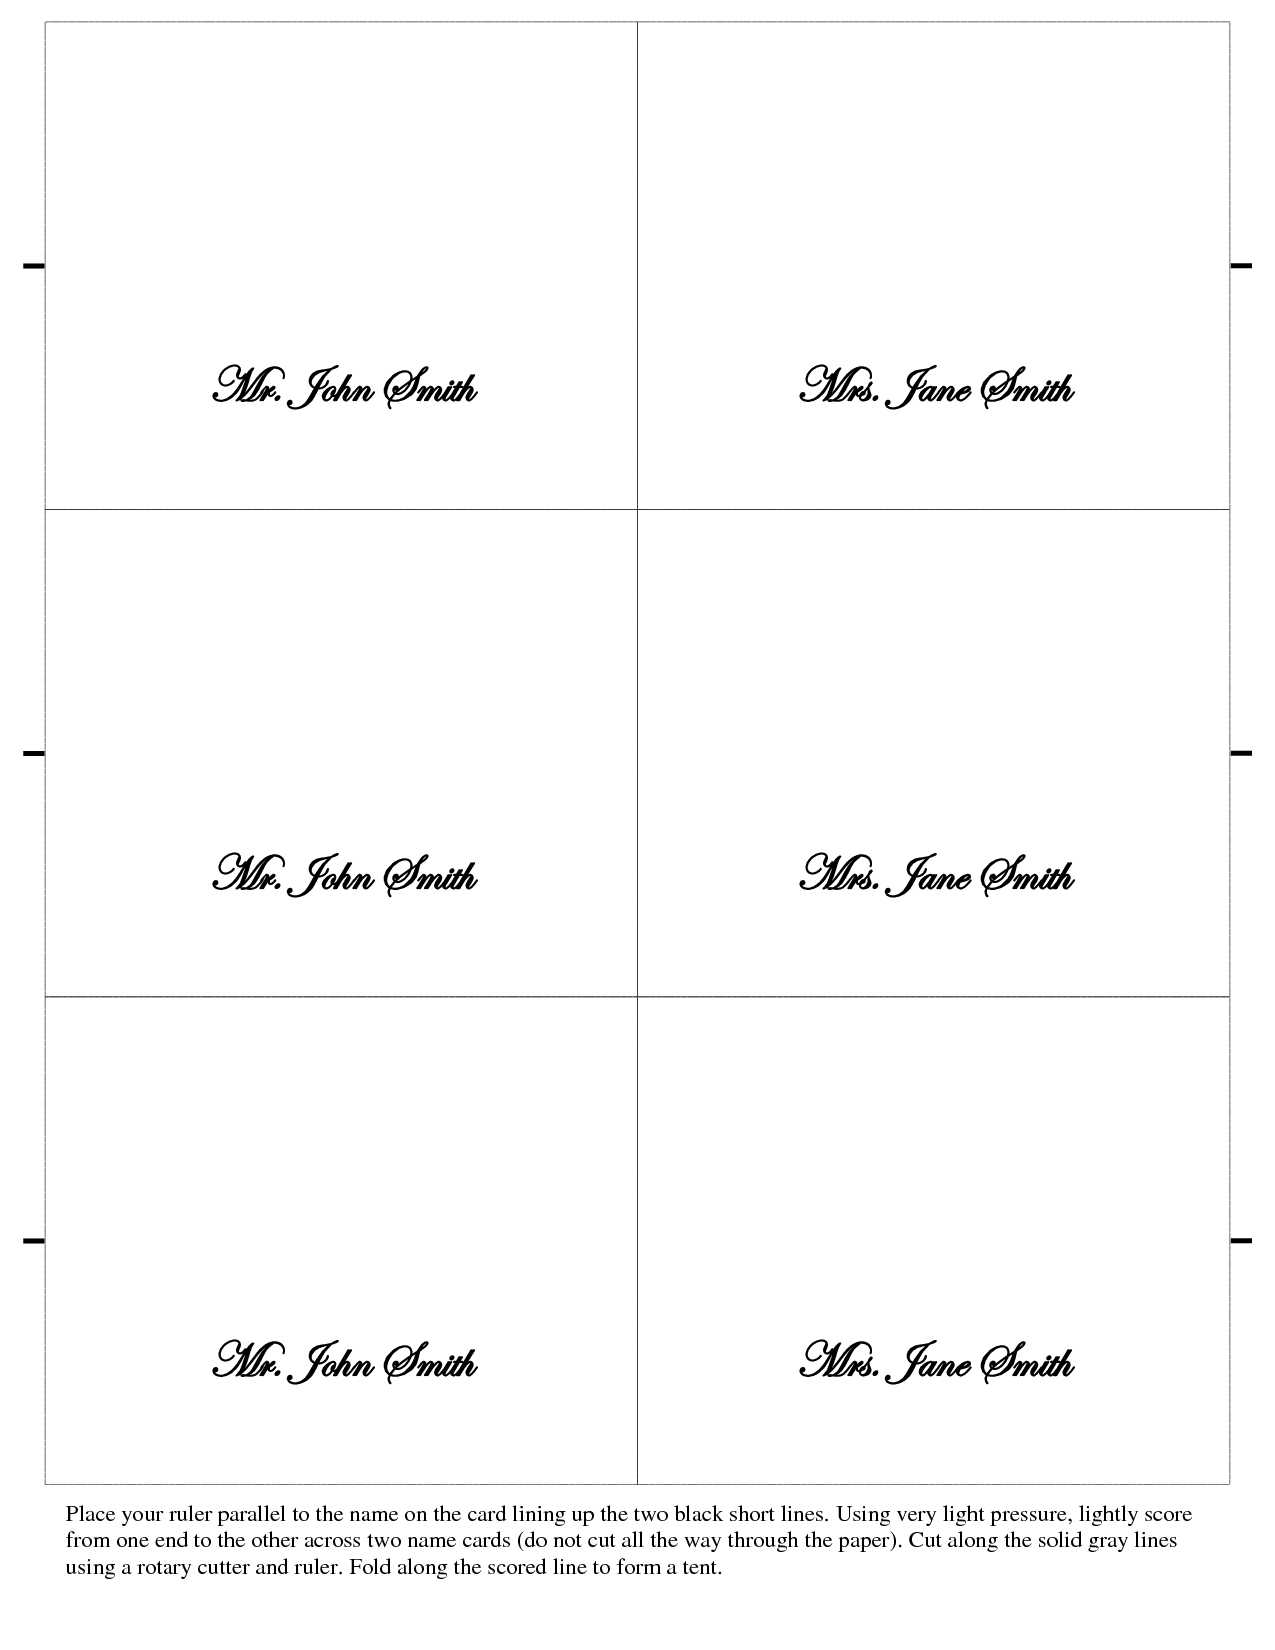 Free Place Card Templates 6 Per Page - Atlantaauctionco Throughout Place Card Template Free 6 Per Page